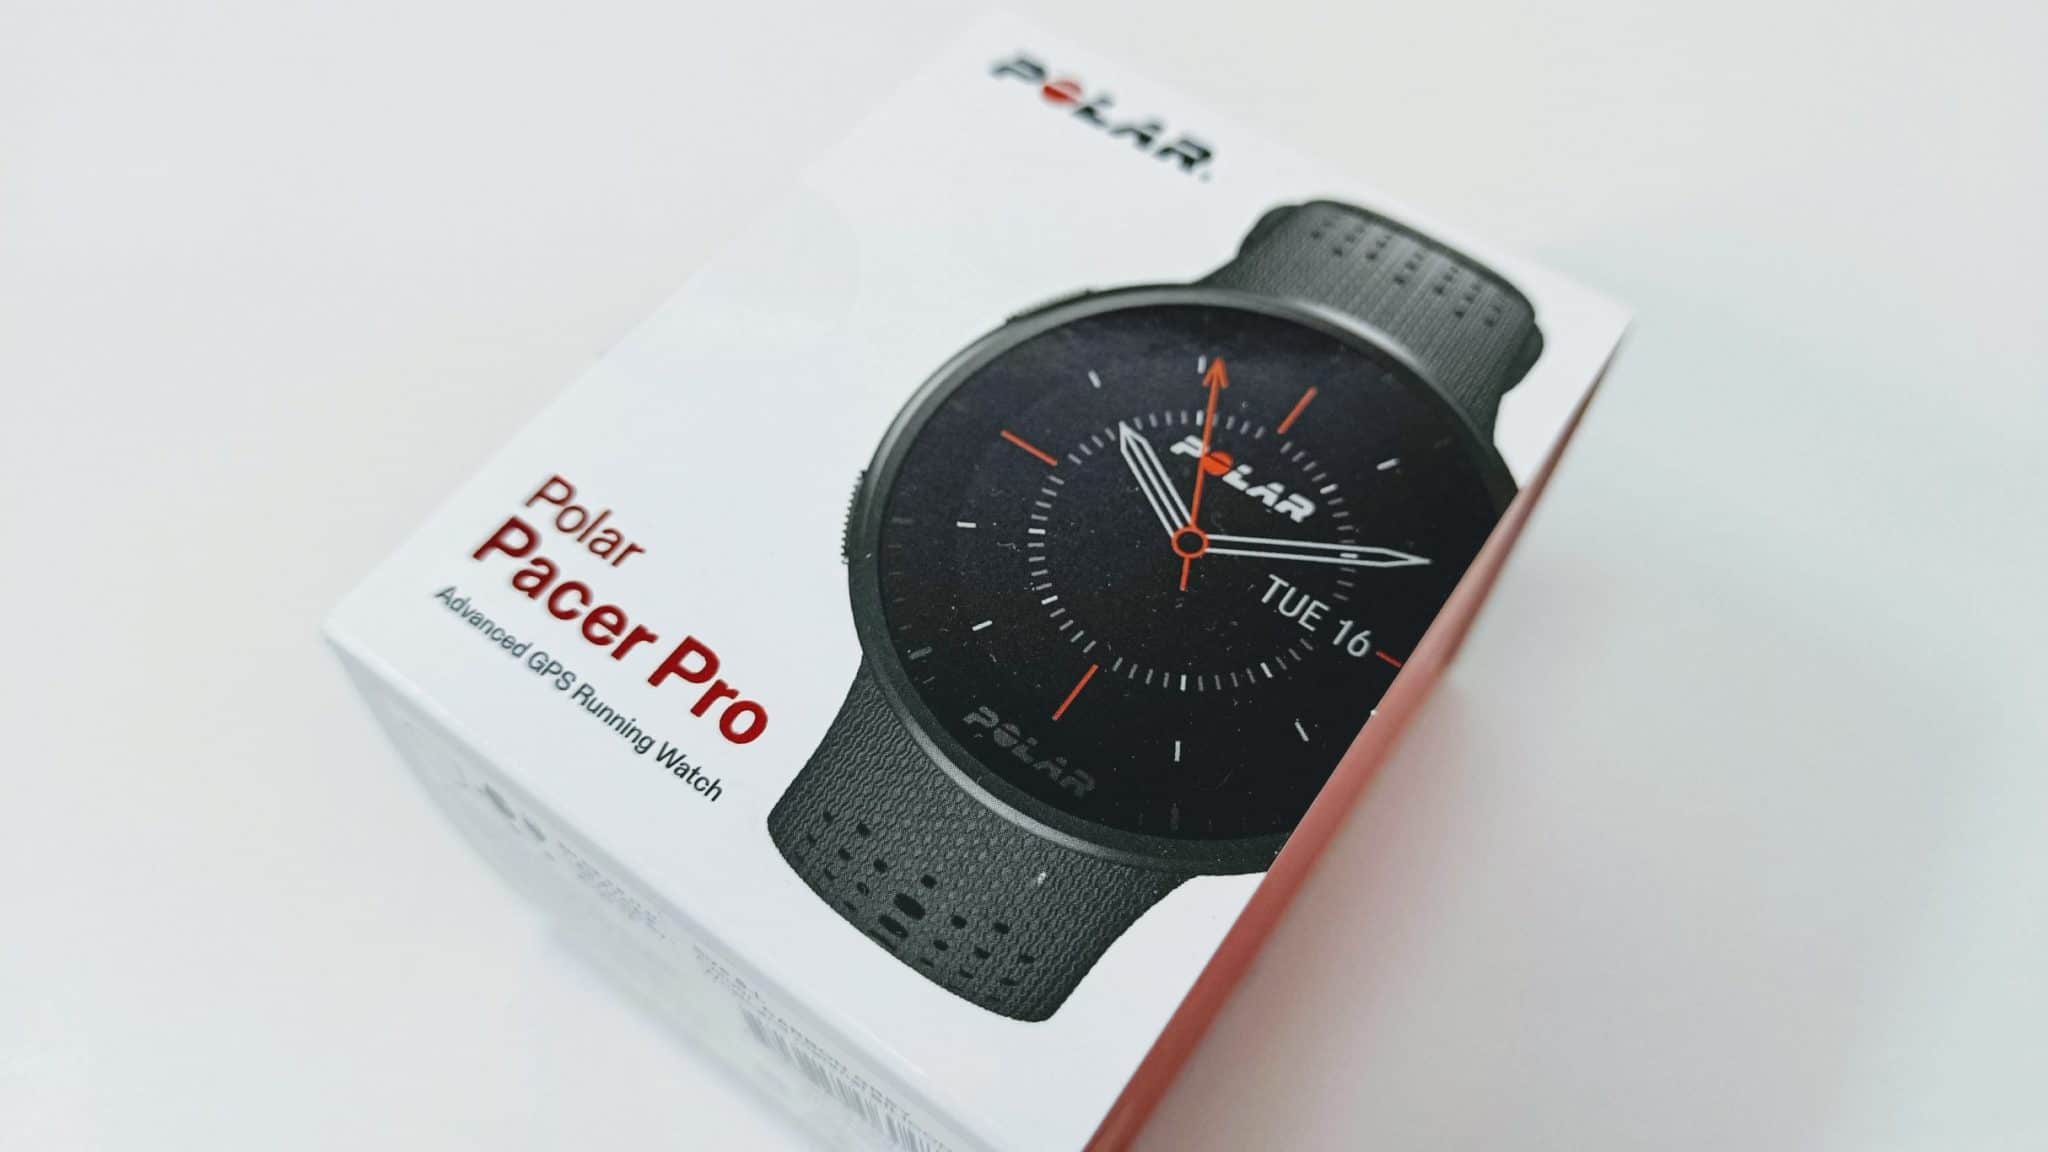 Polar Pacer Pro (2 stores) find prices • Compare today »